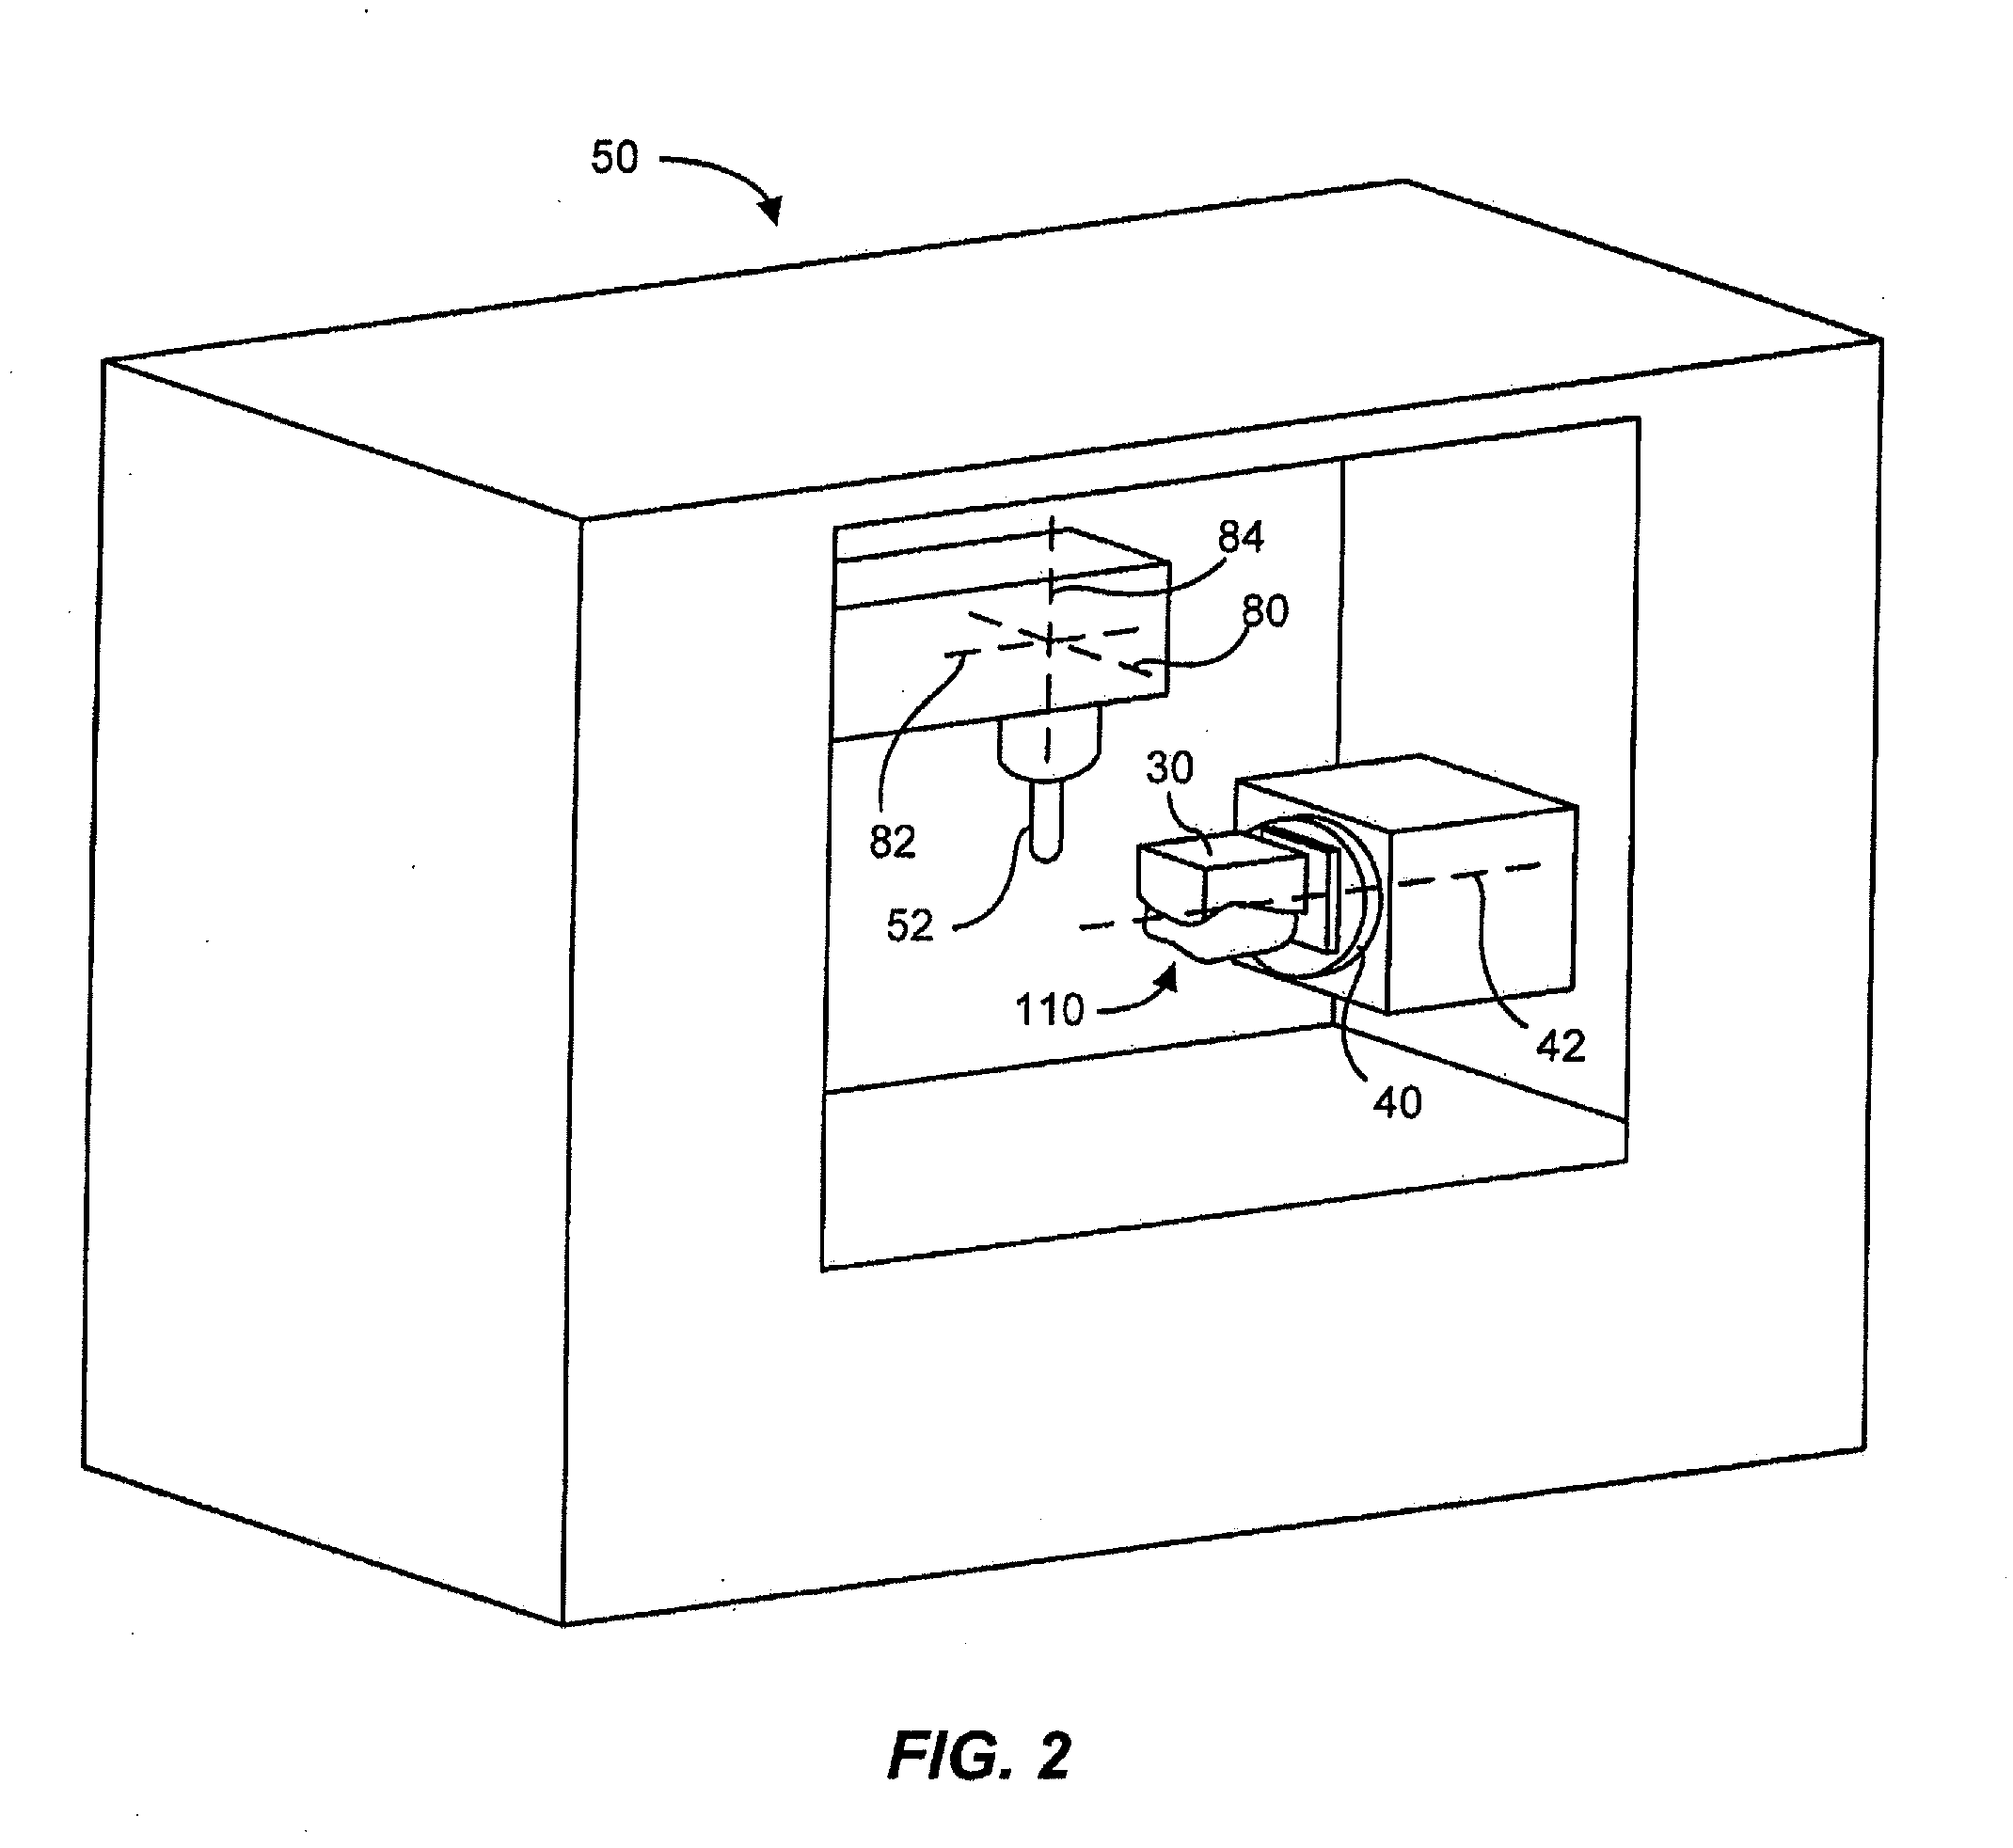 Method for Machining a Dental Prosthesis